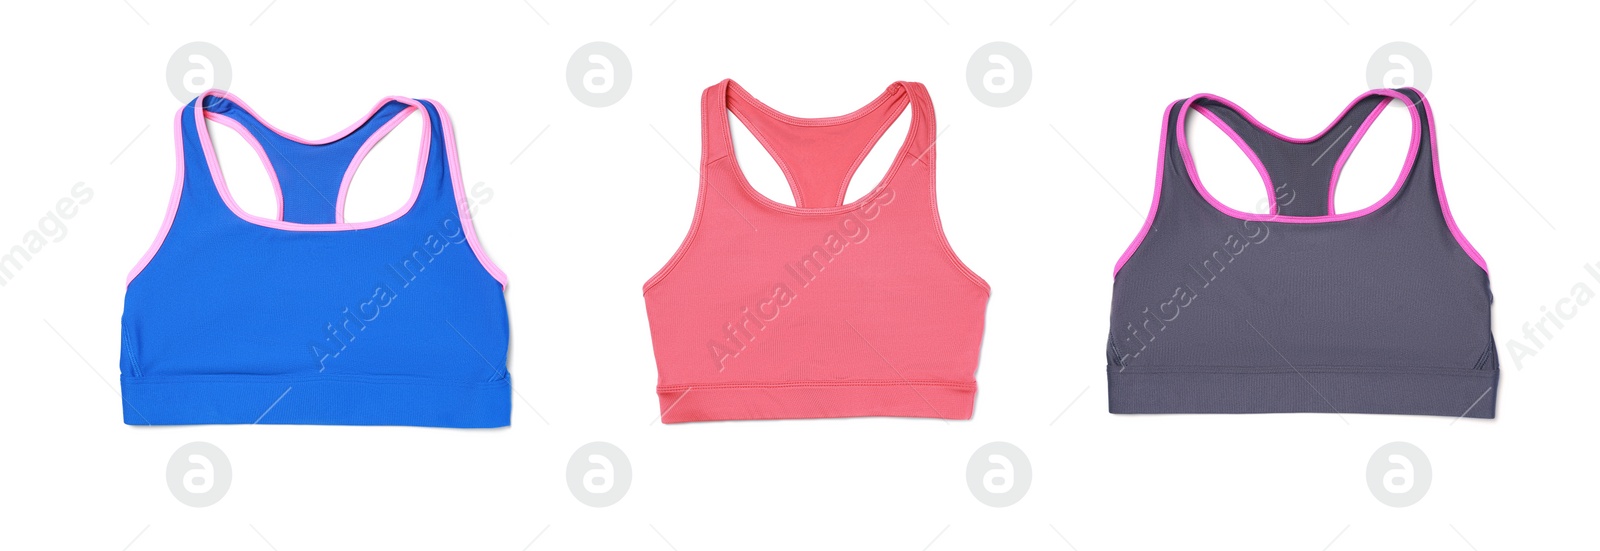 Image of Comfortable sportswear. Set with different color sports bras on white background. top view